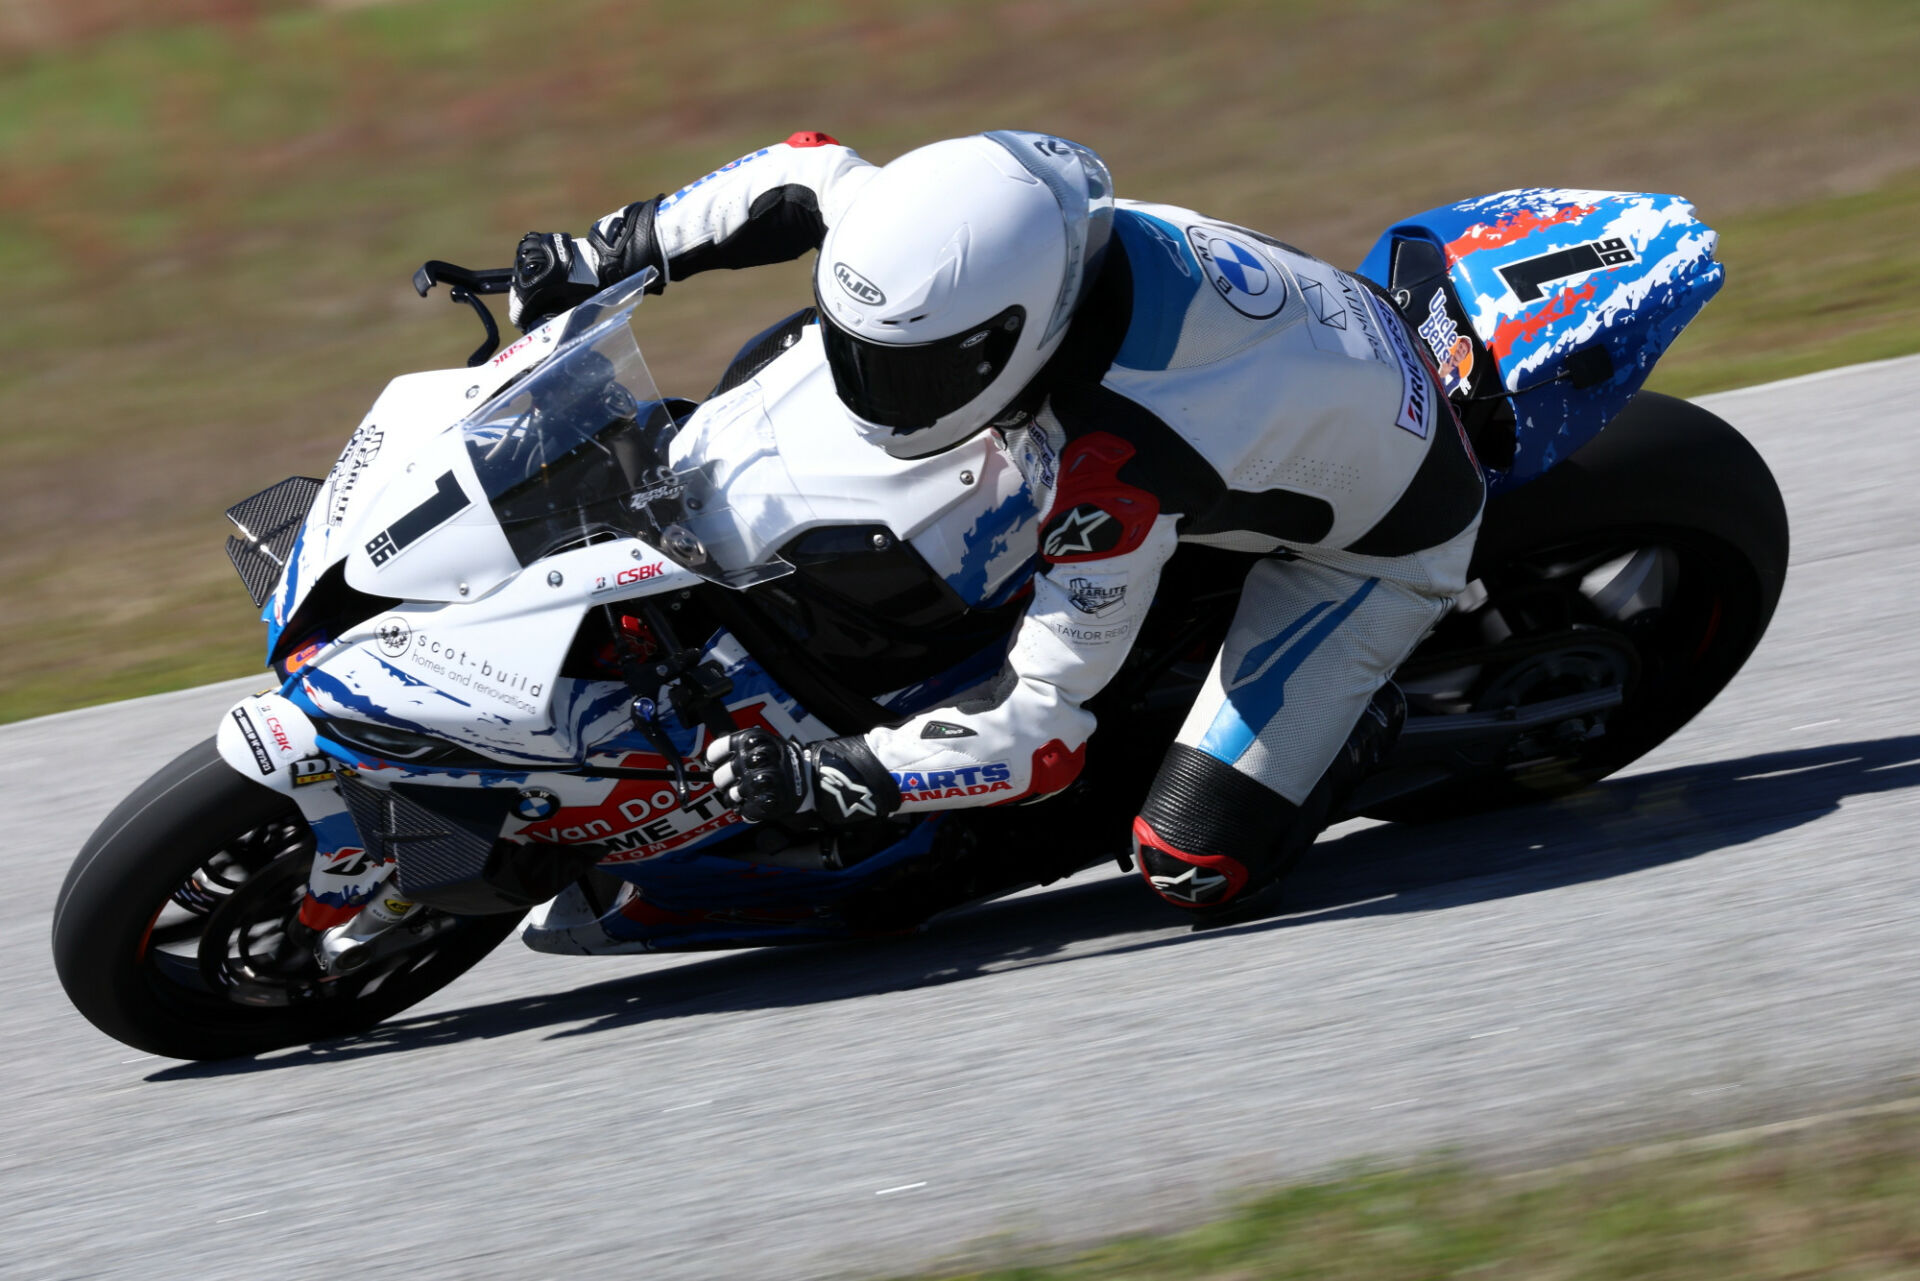 Defending Canadian Superbike Champion Ben Young (1). Photo by Rob O'Brien, courtesy CSBK.